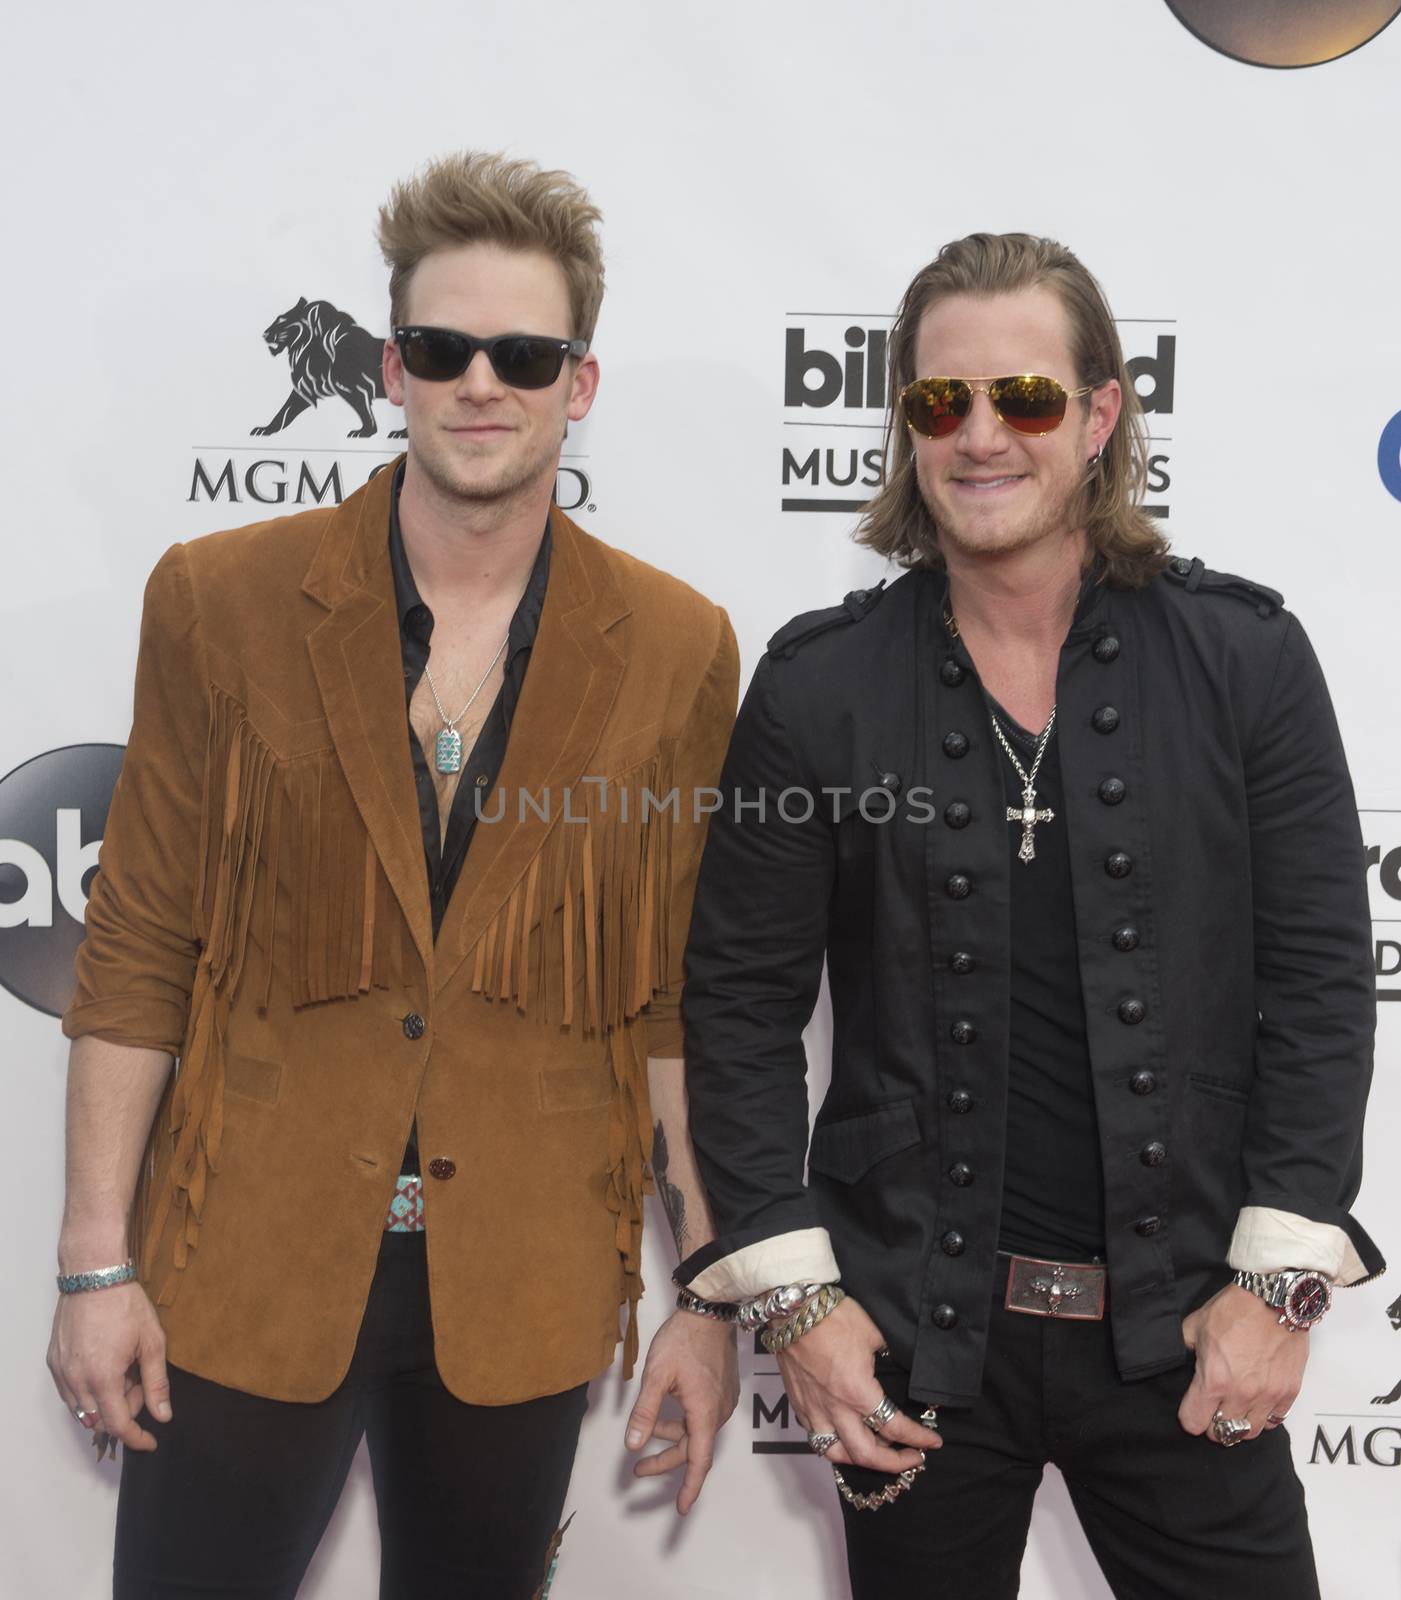 LAS VEGAS - MAY 18 : Florida Georgia Line members Brian Kelley (L) and Tyler Hubbard attend the 2014 Billboard Music Awards at the MGM Grand Garden Arena on May 18 , 2014 in Las Vegas.